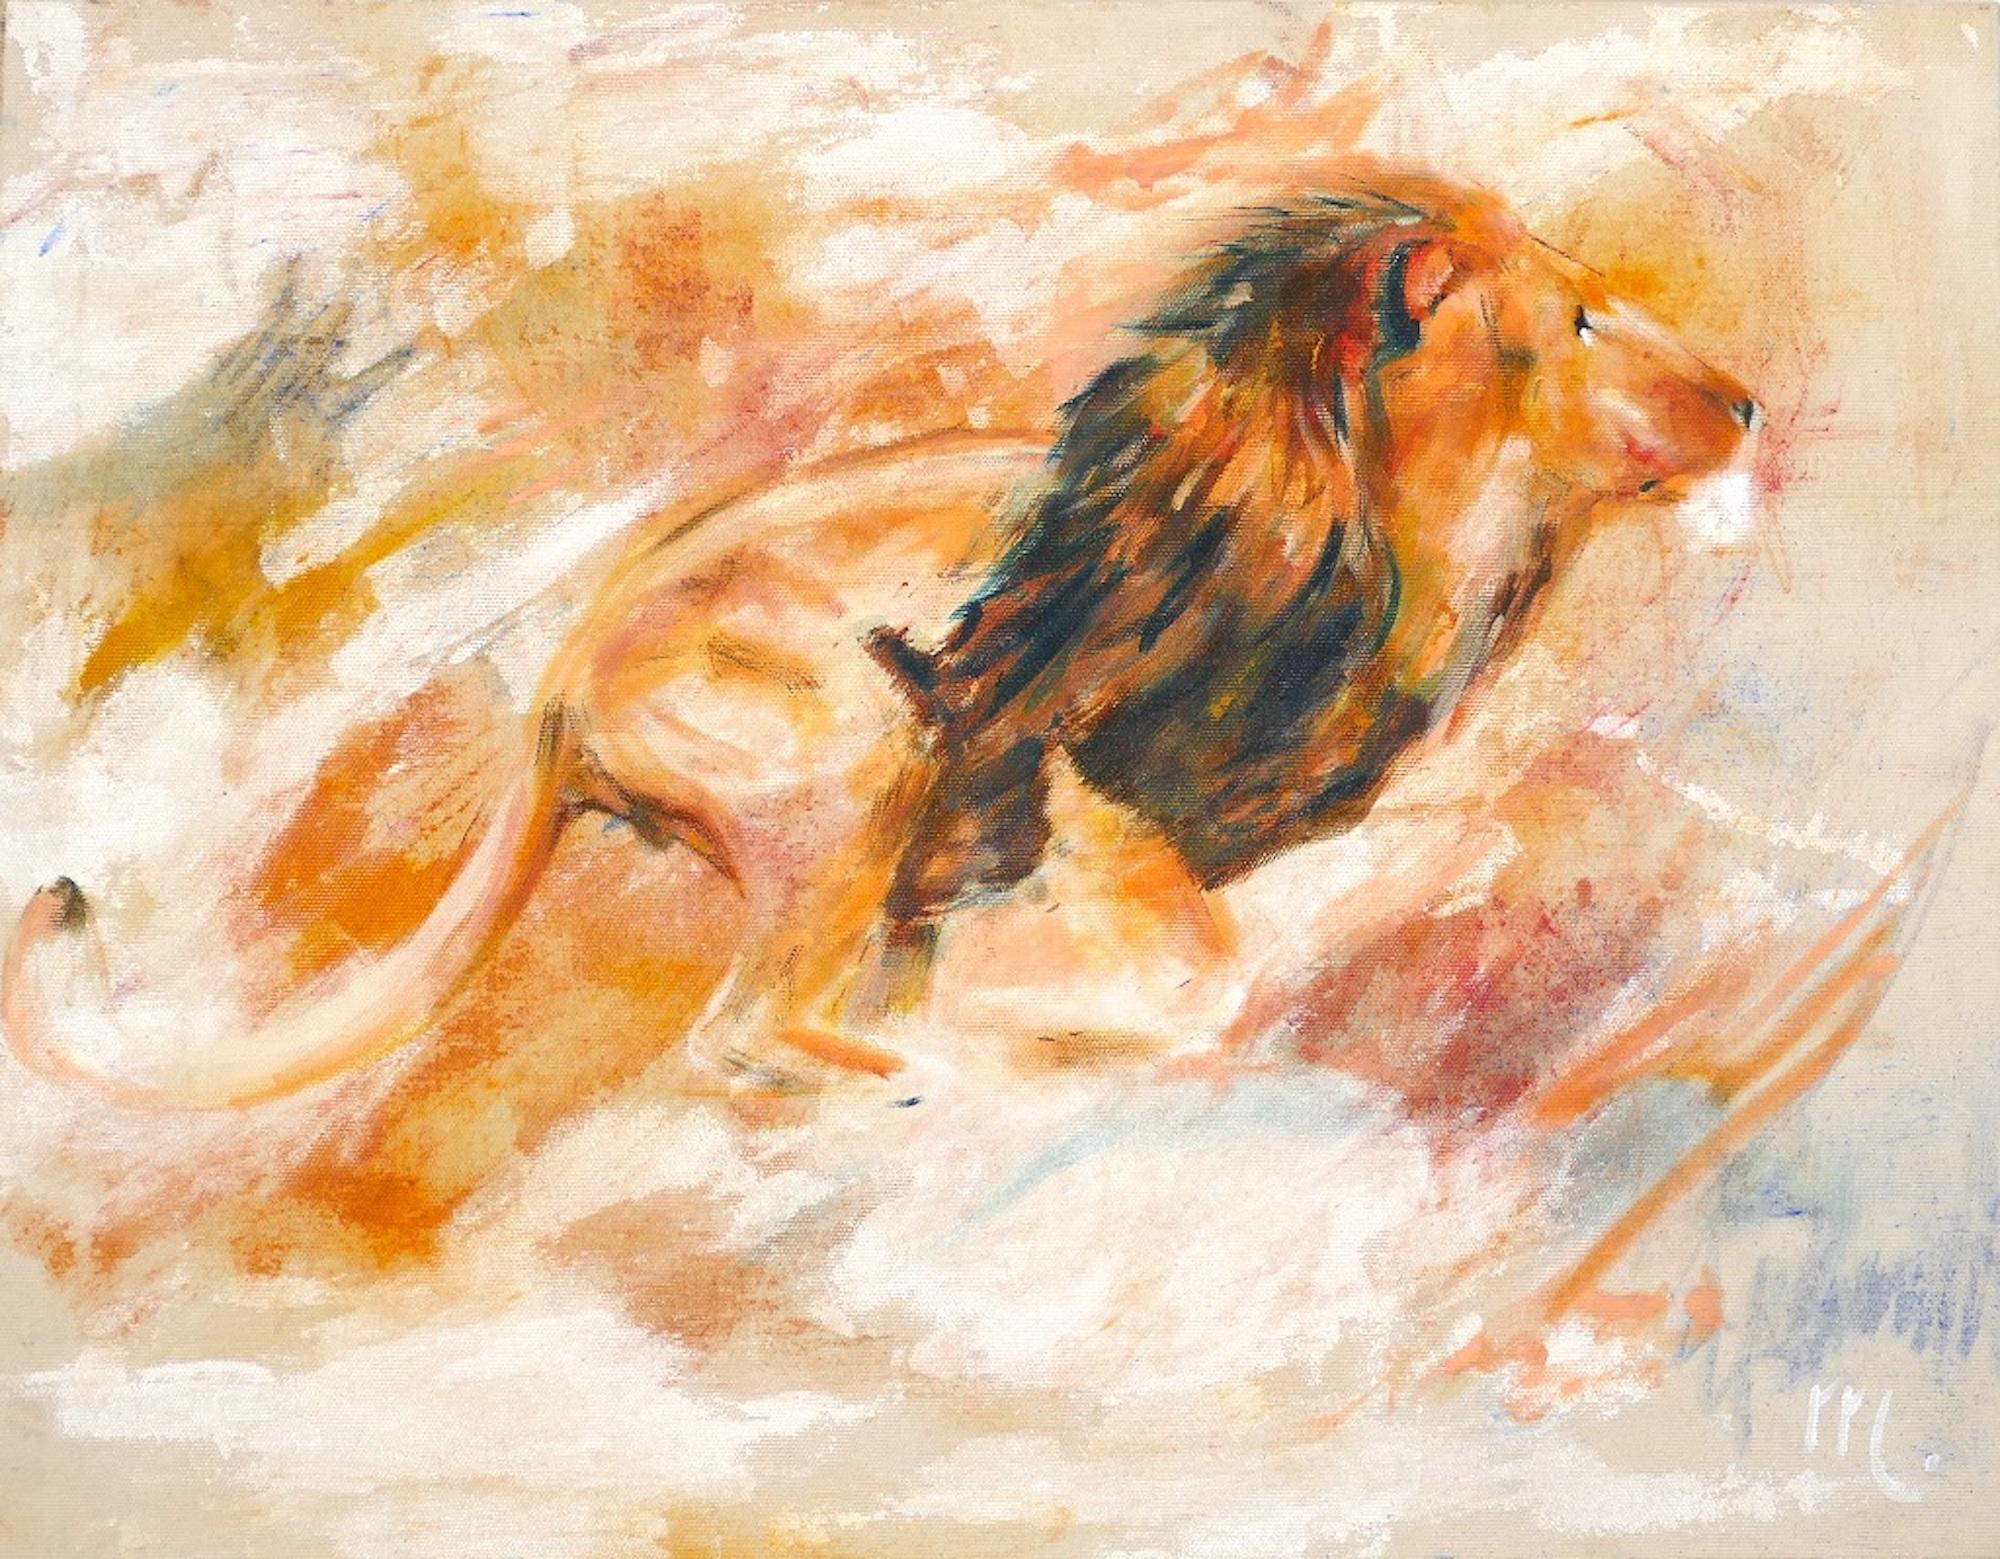 Lion is a beautiful original oil painting on canvas, realized in the 2000s by the contemporary and emerging artist Marij Hendrickx.

Monogrammed on the lower right corner in white oil paint "M". 

A magnificent lion is portrayed of profile and in a